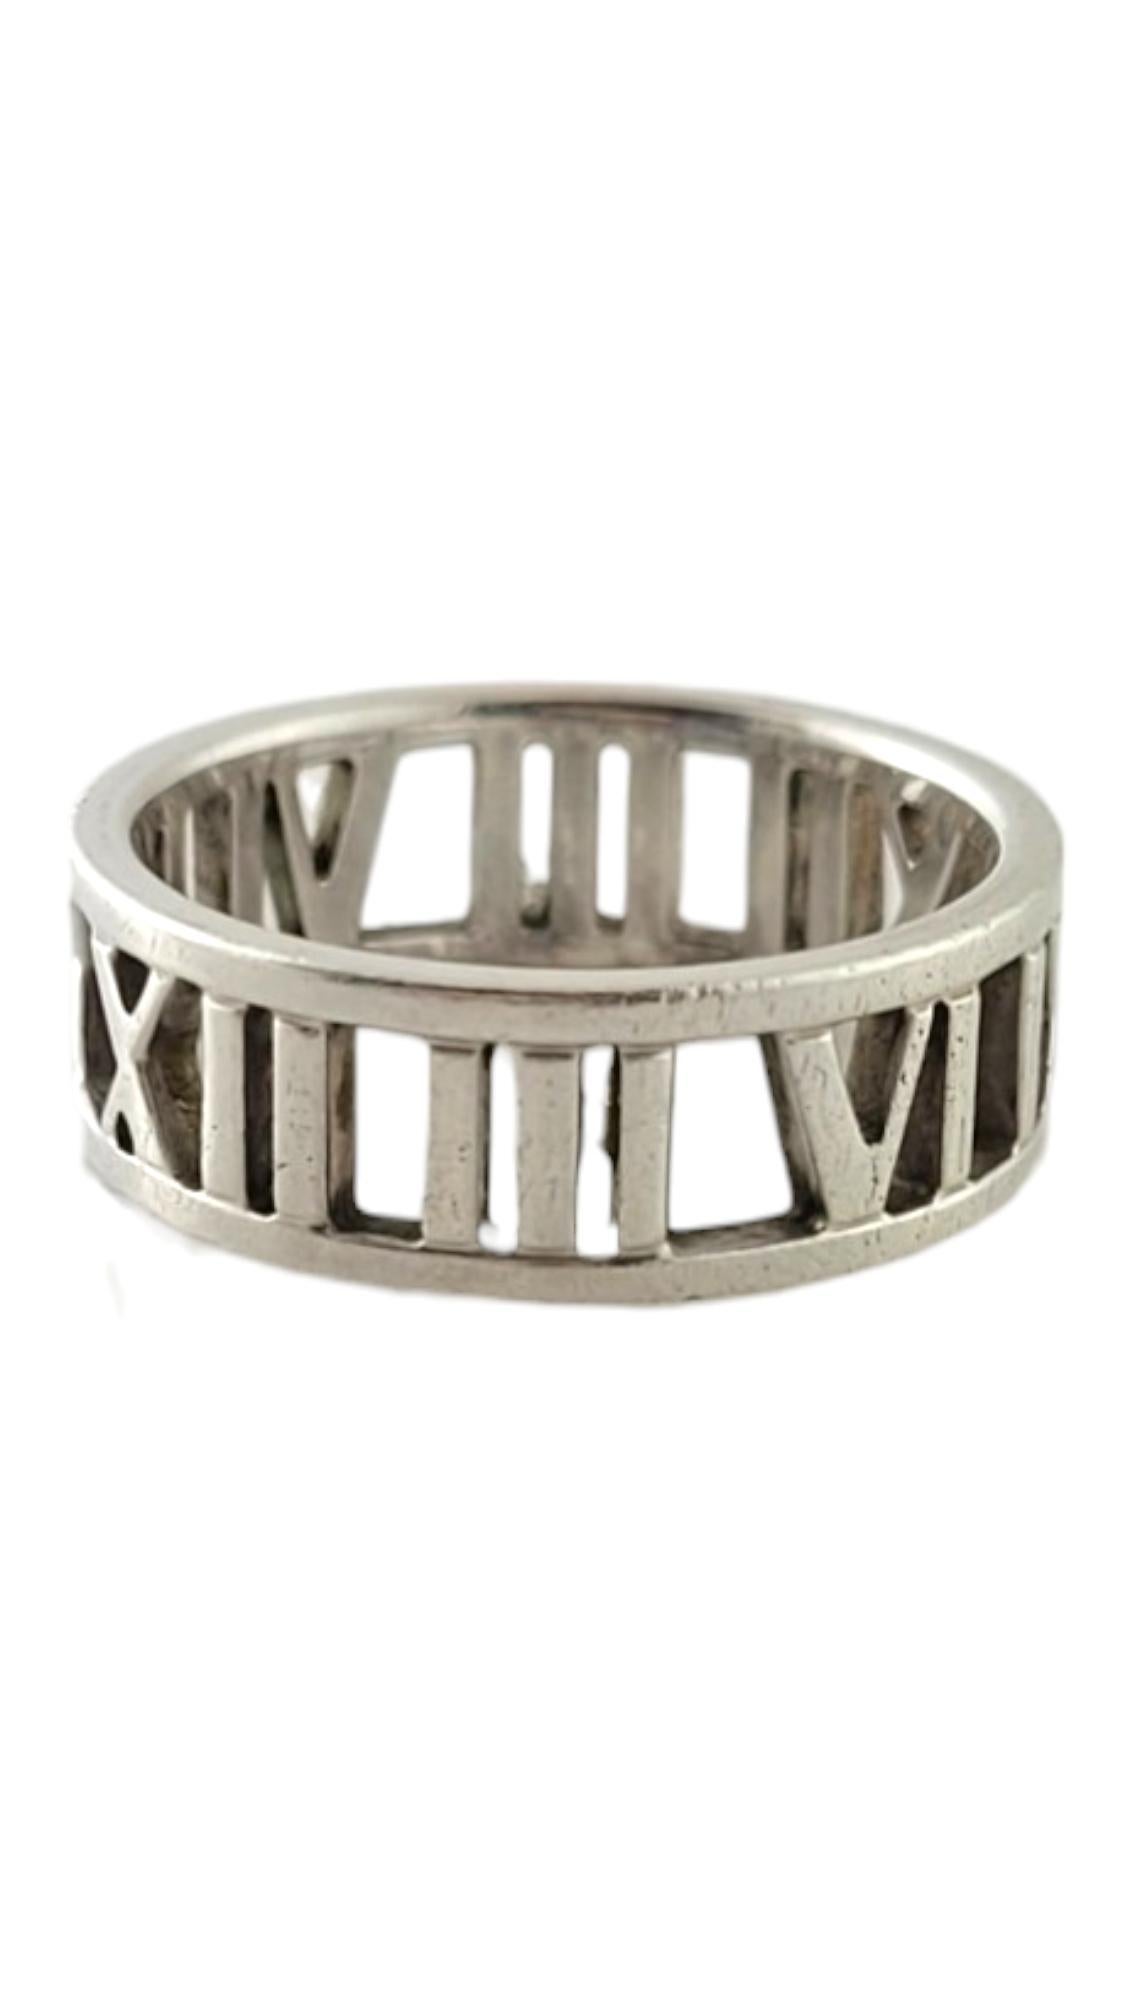 Tiffany & Co. Sterling Silver Open Roman Numeral Band Ring Size 7.25-7.5

This gorgeous open roman numeral band ring by Tiffany & Co. was crafted from sterling silver!

Size: 7.25-7.5
Shank: 6.70mm 

Weight: 2.40 dwt/ 3.73 g

Hallmark: T&Co